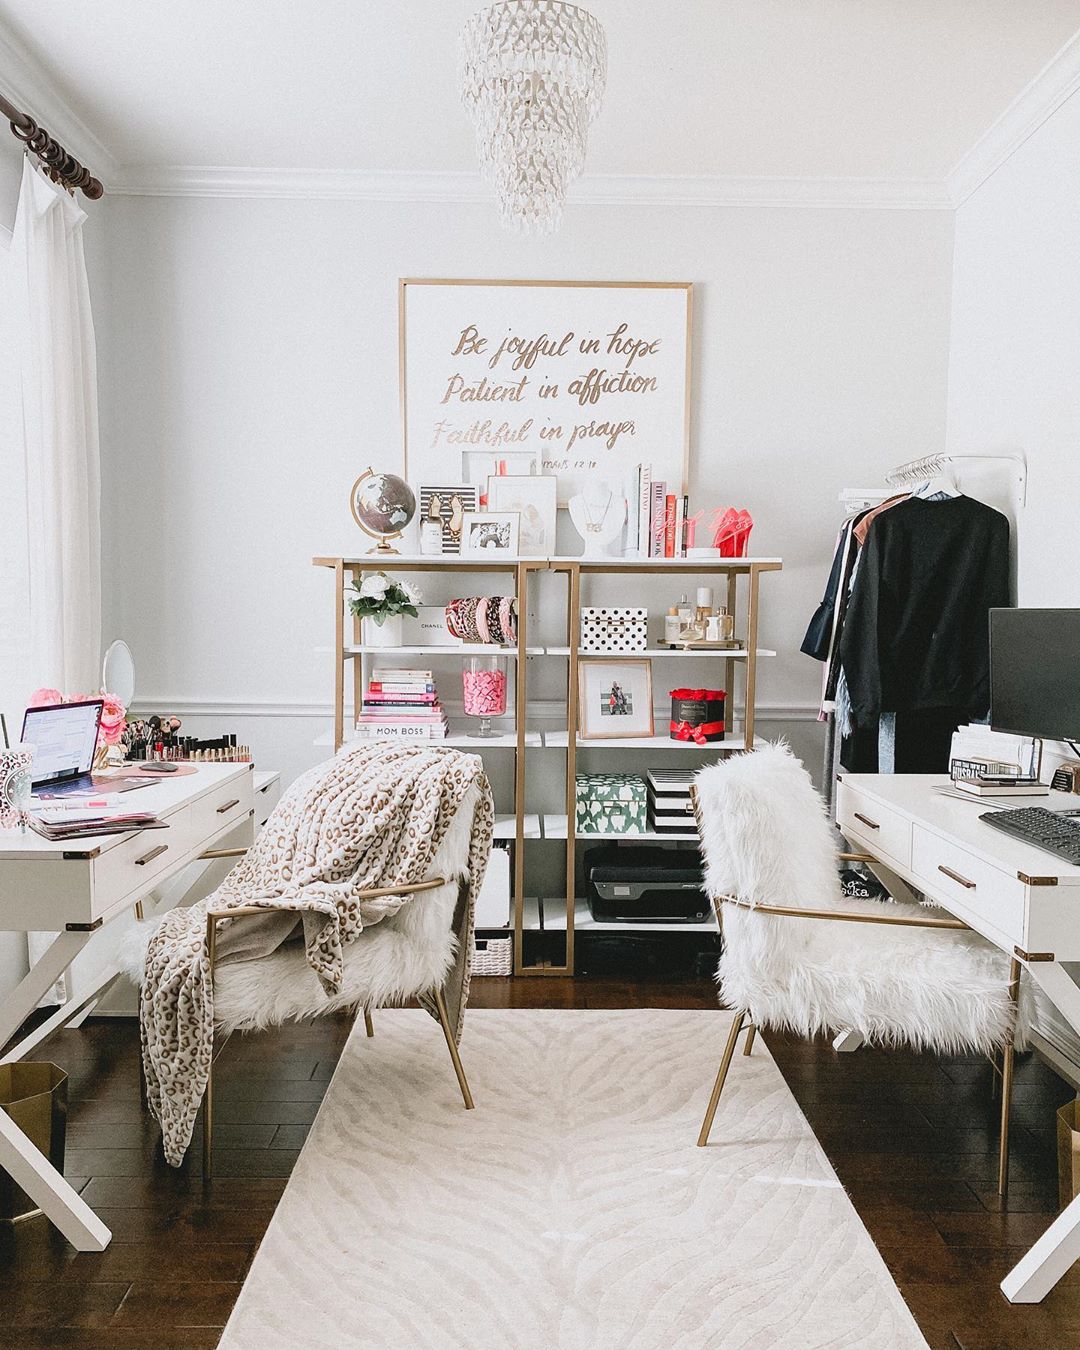 shared home office space with two desks and chairs photo by Instagram user @uptownwithellybrown